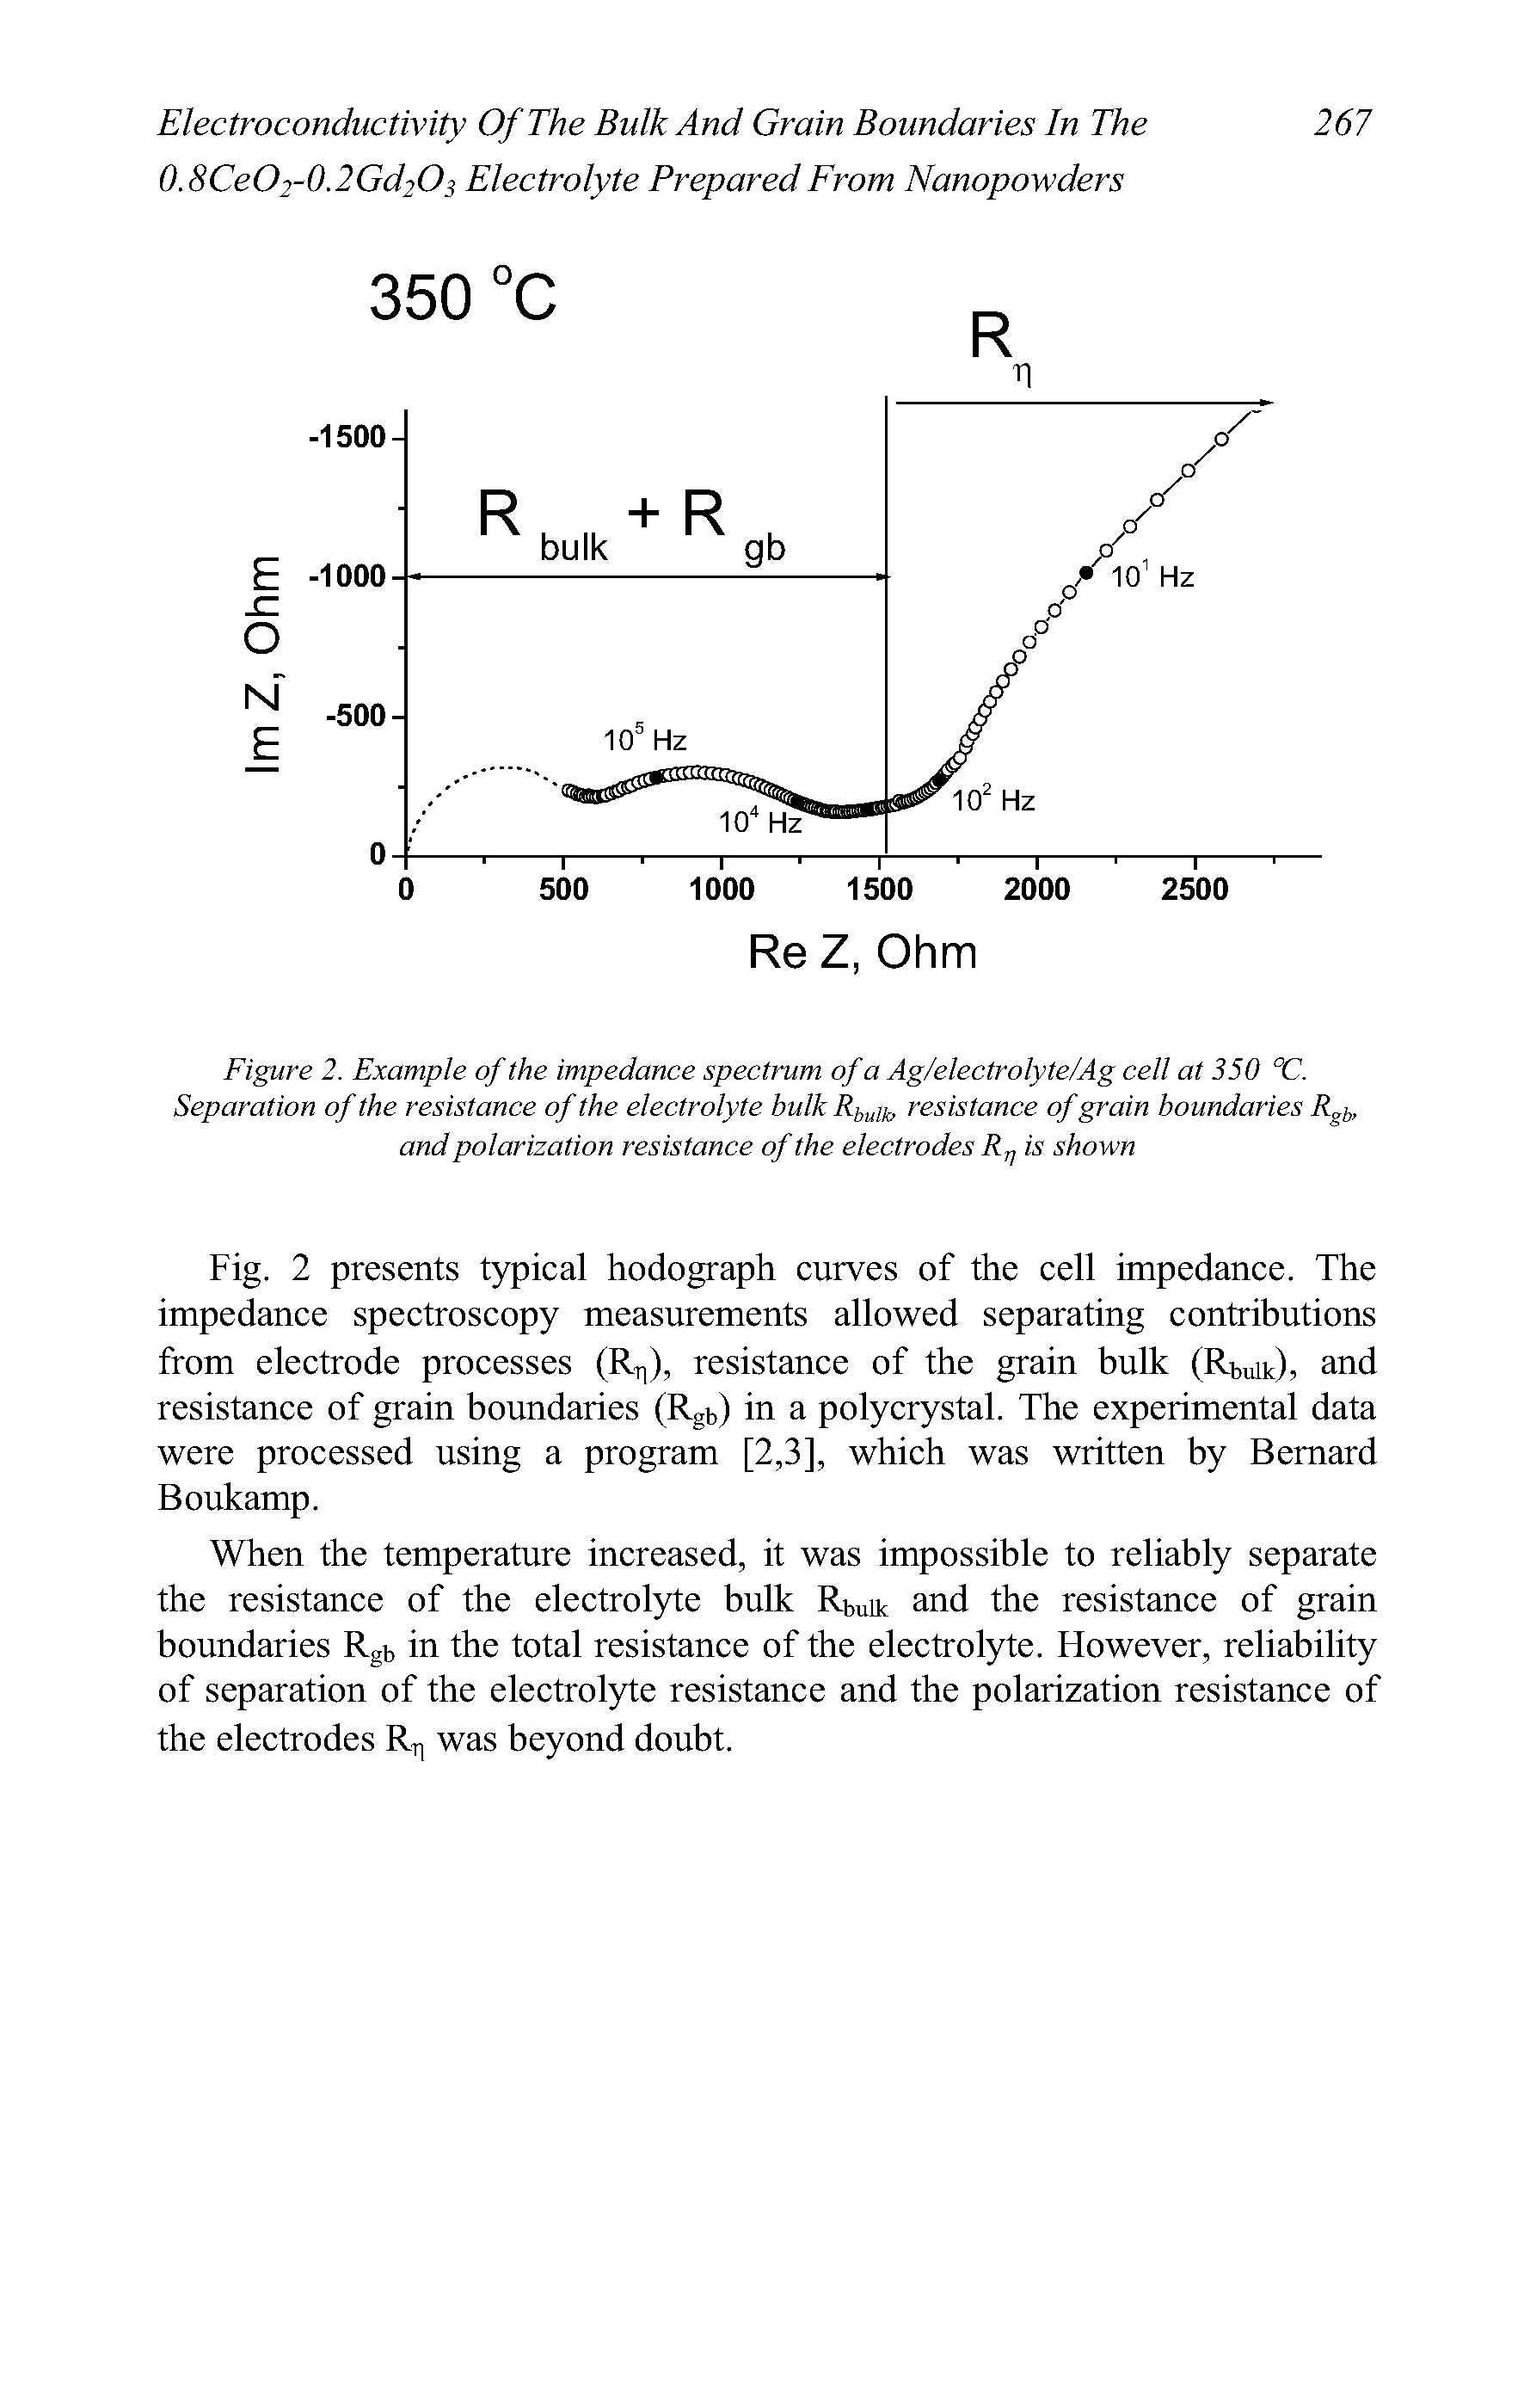 Figure 2. Example of the impedance spectrum of a Ag/electrolyte/Ag cell at 350 °C. Separation of the resistance of the electrolyte bulk R uih resistance of grain boundaries Rgi, and polarization resistance of the electrodes R j is shown...